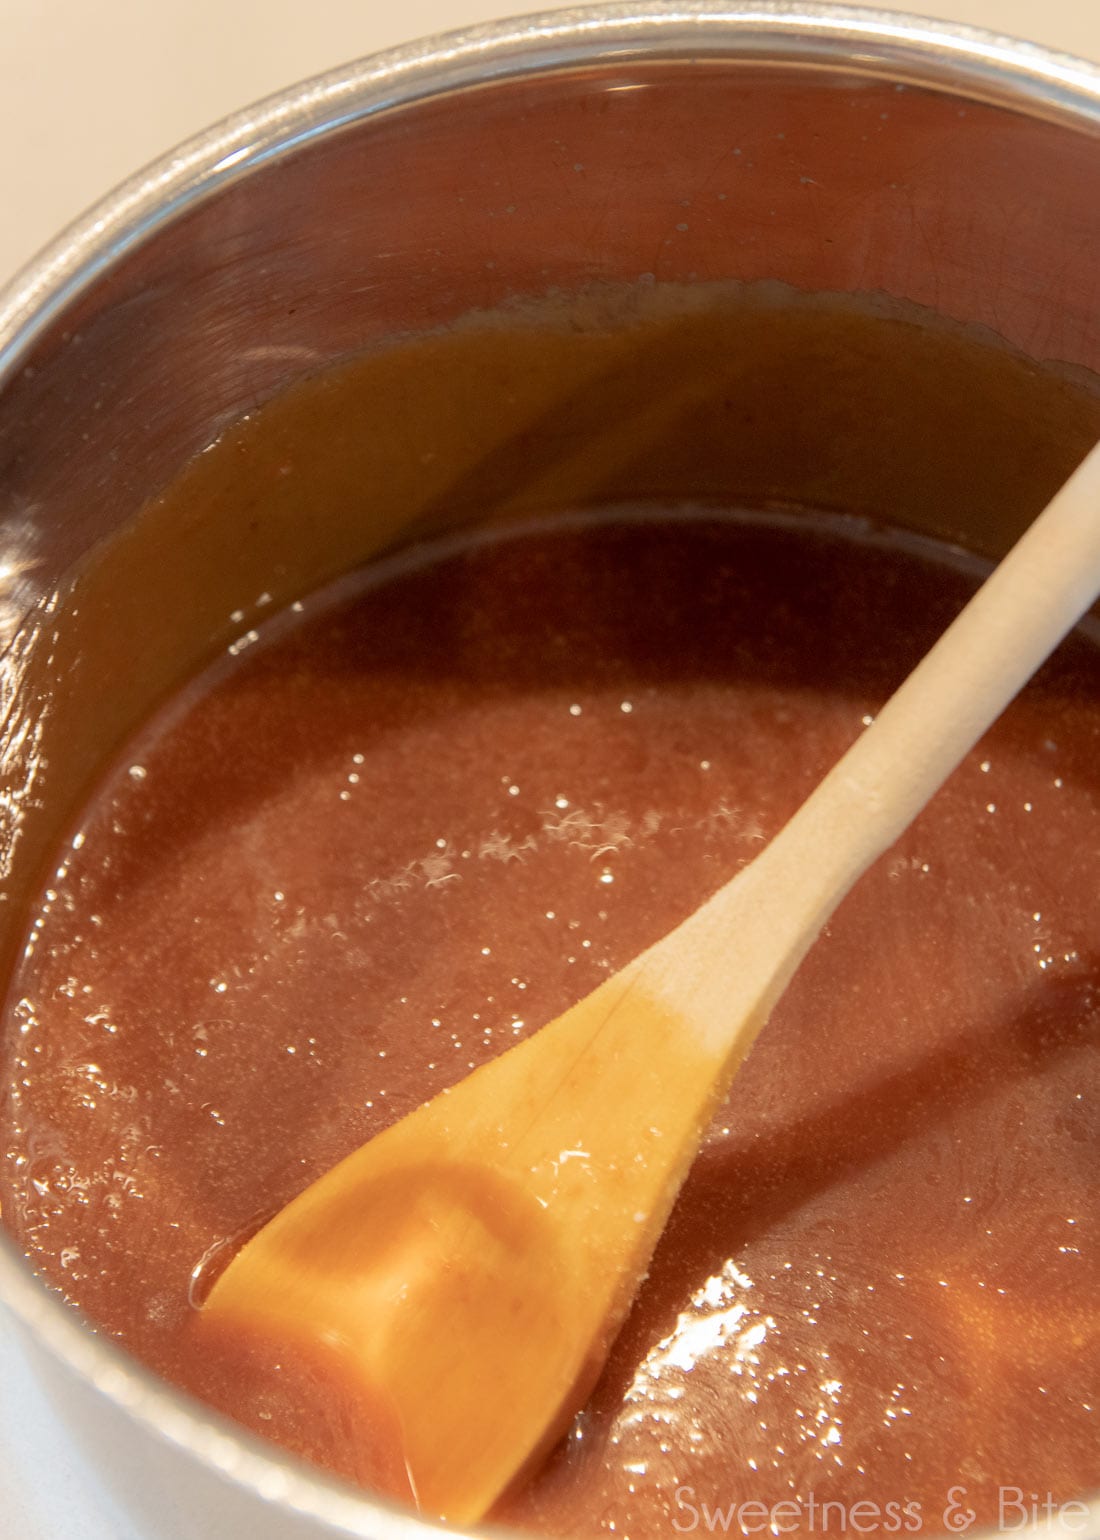 A saucepan with caramel sauce in it, with a wooden spoon.